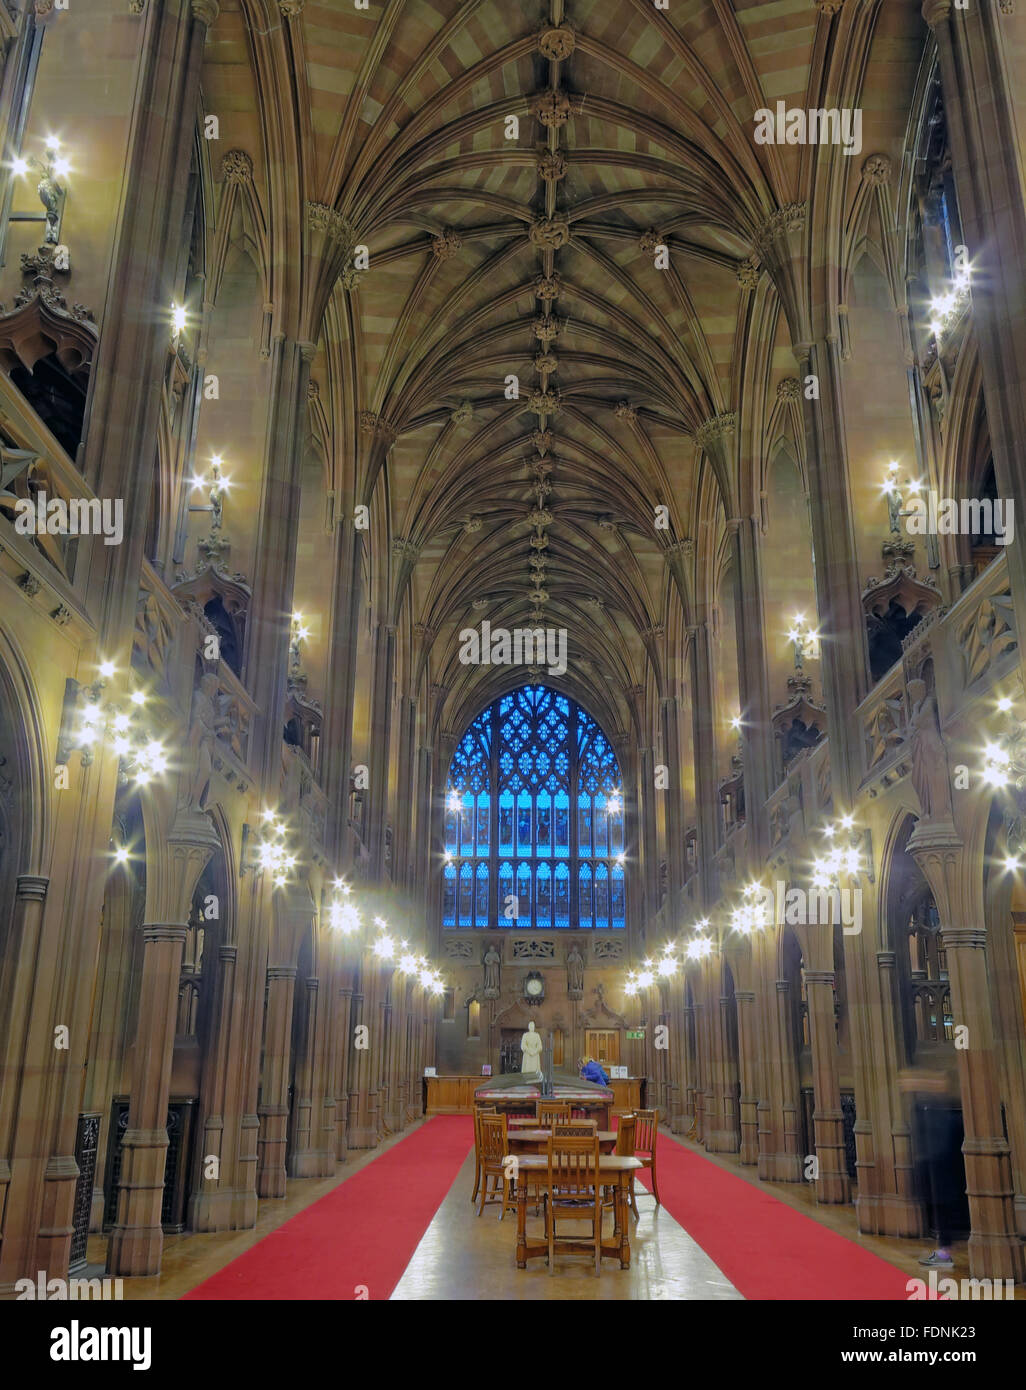 John Rylands Library Interior, Deansgate, Manchester, Angleterre, Royaume-Uni - long View, 150 Deansgate, Manchester, Angleterre, Royaume-Uni, M3 3EH Banque D'Images